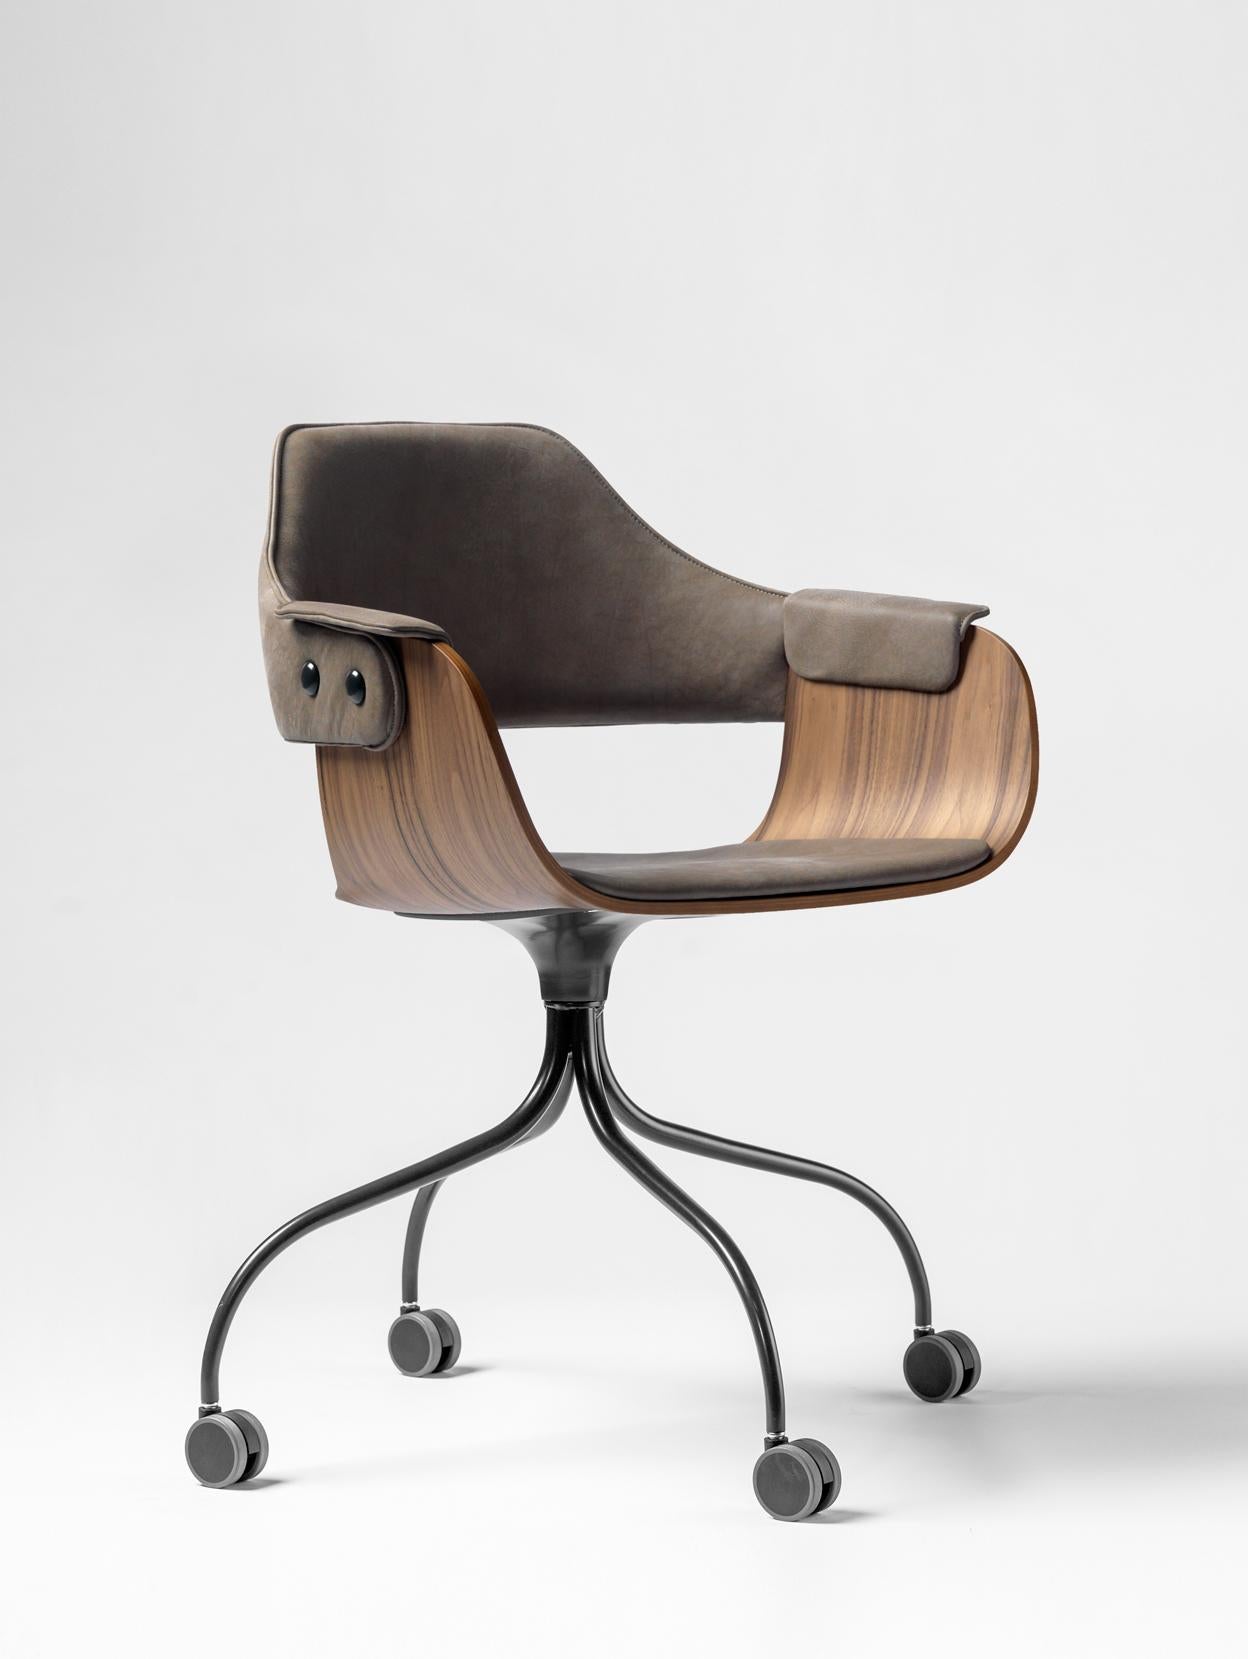 Espagnol Upholstered desk chair in walnut and leather on casters.  en vente